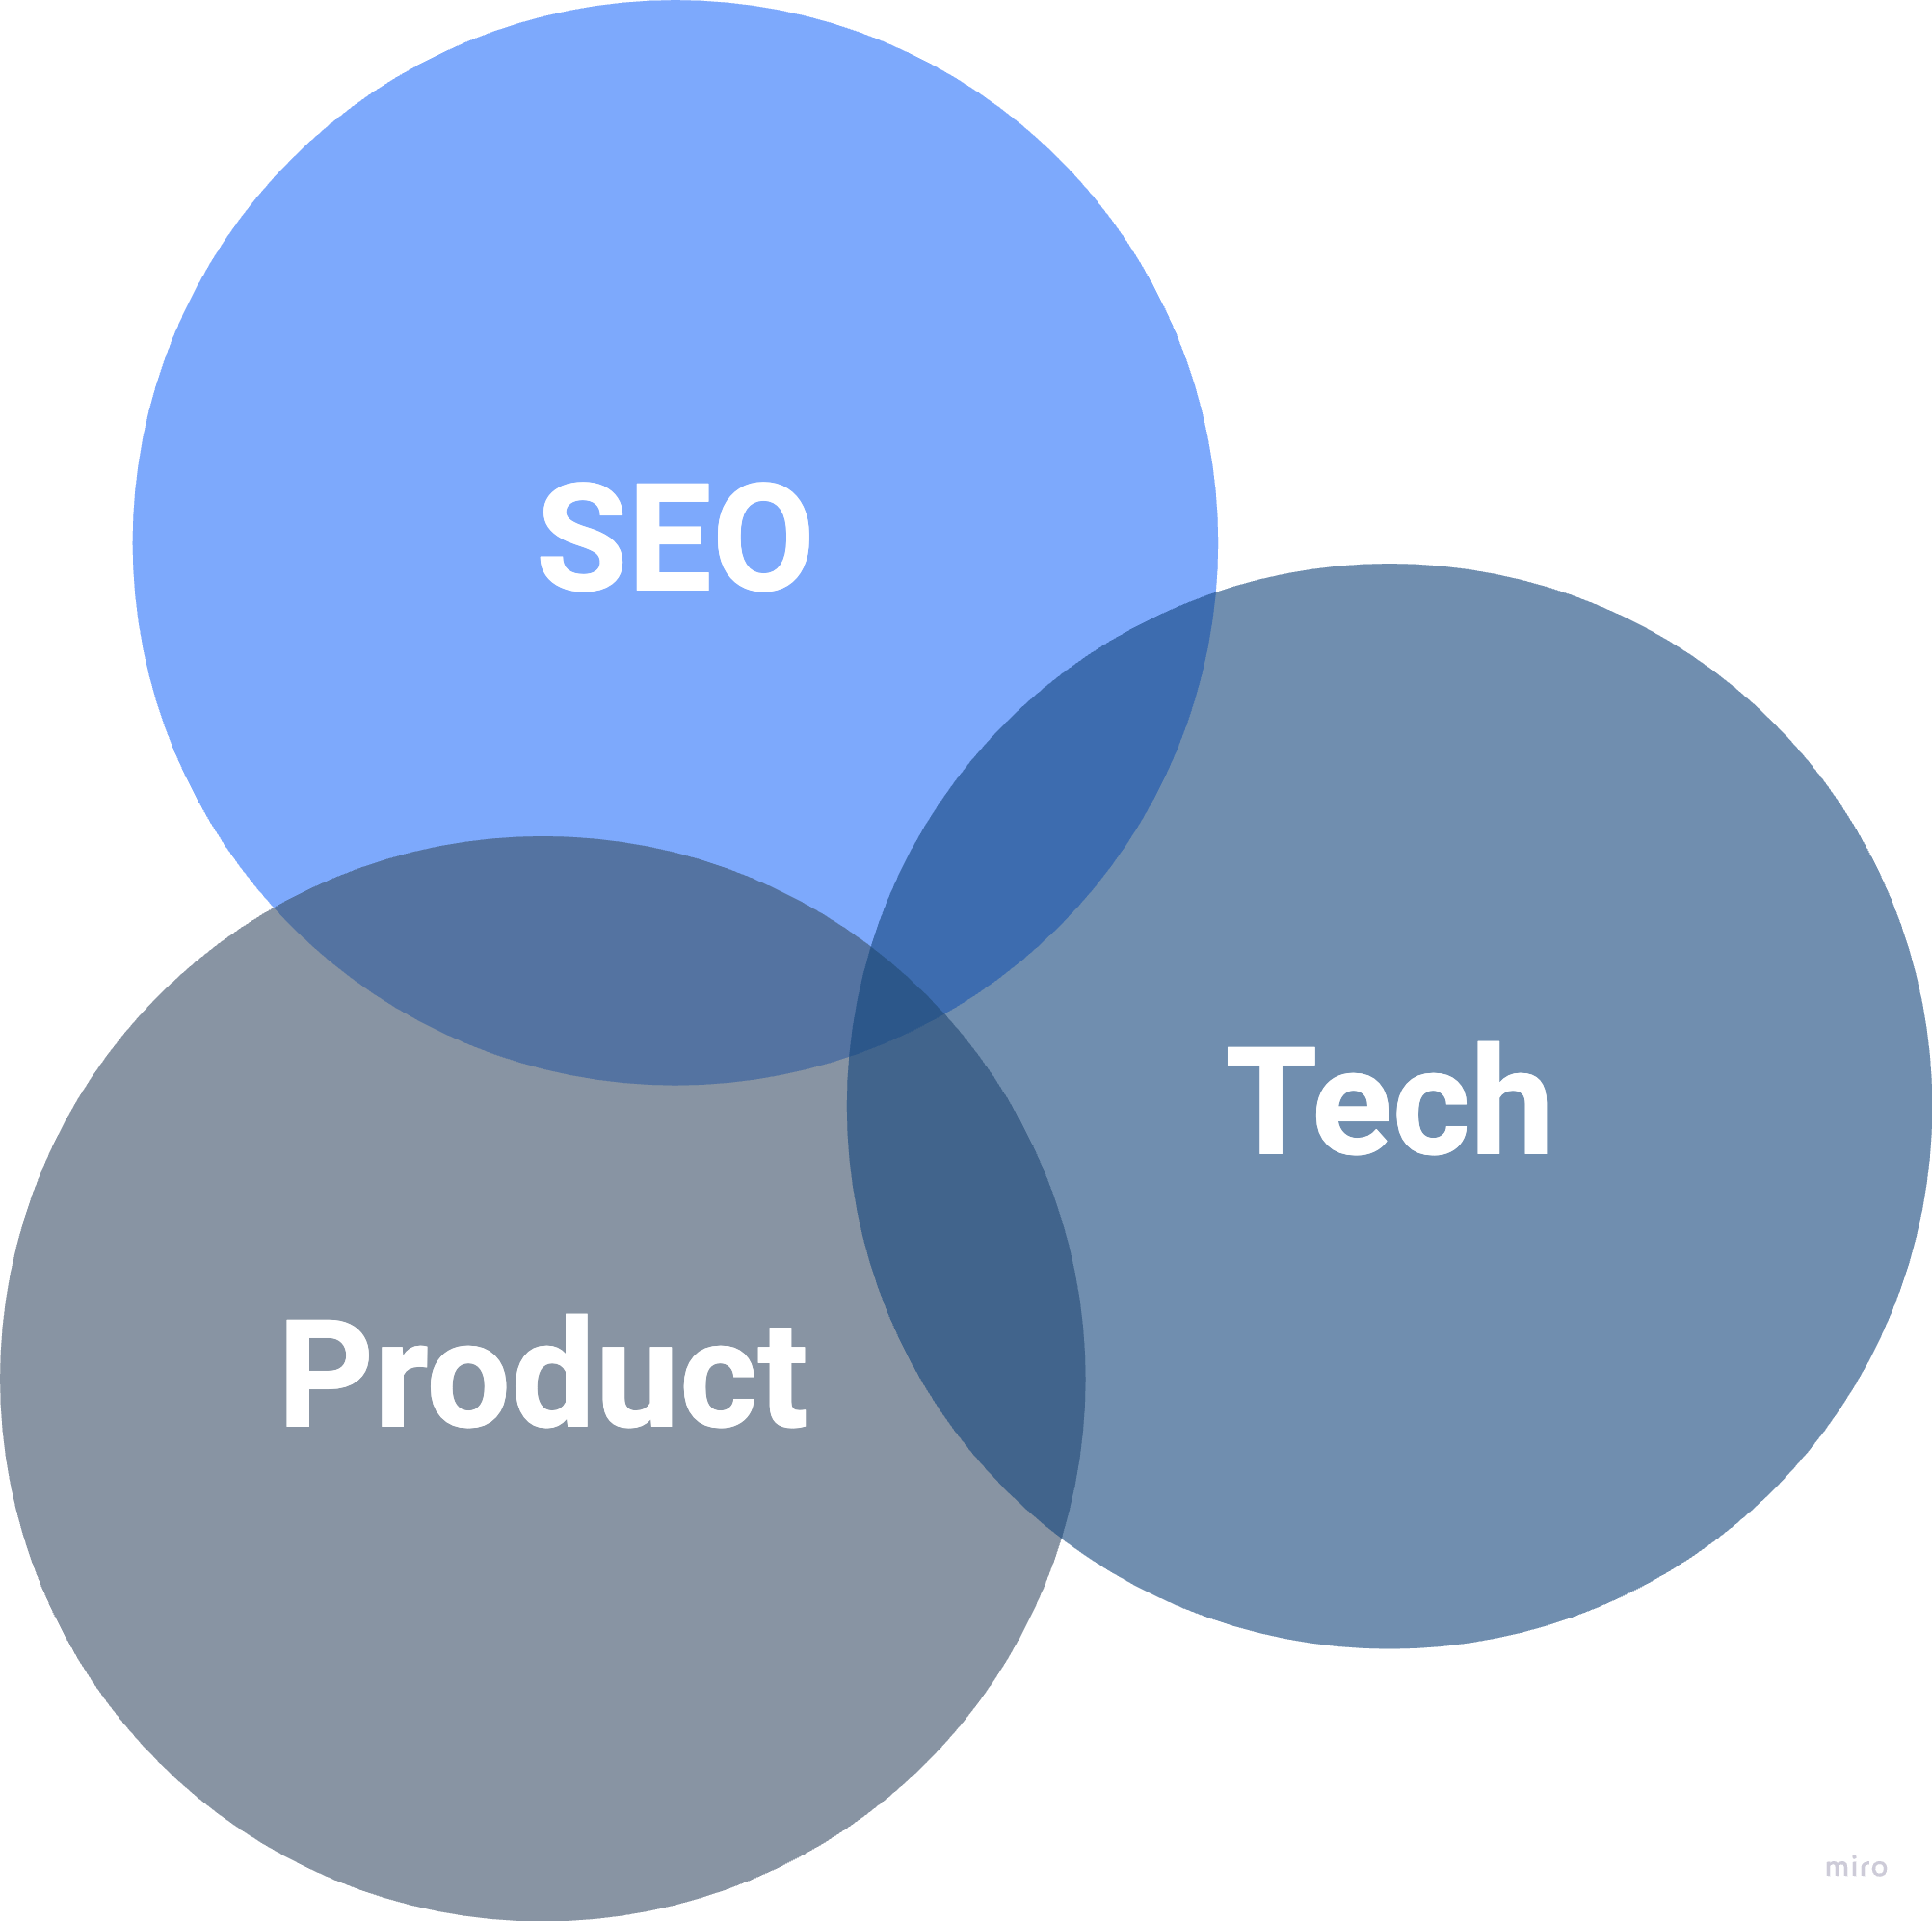 SEO, Product, and Technologies intersection